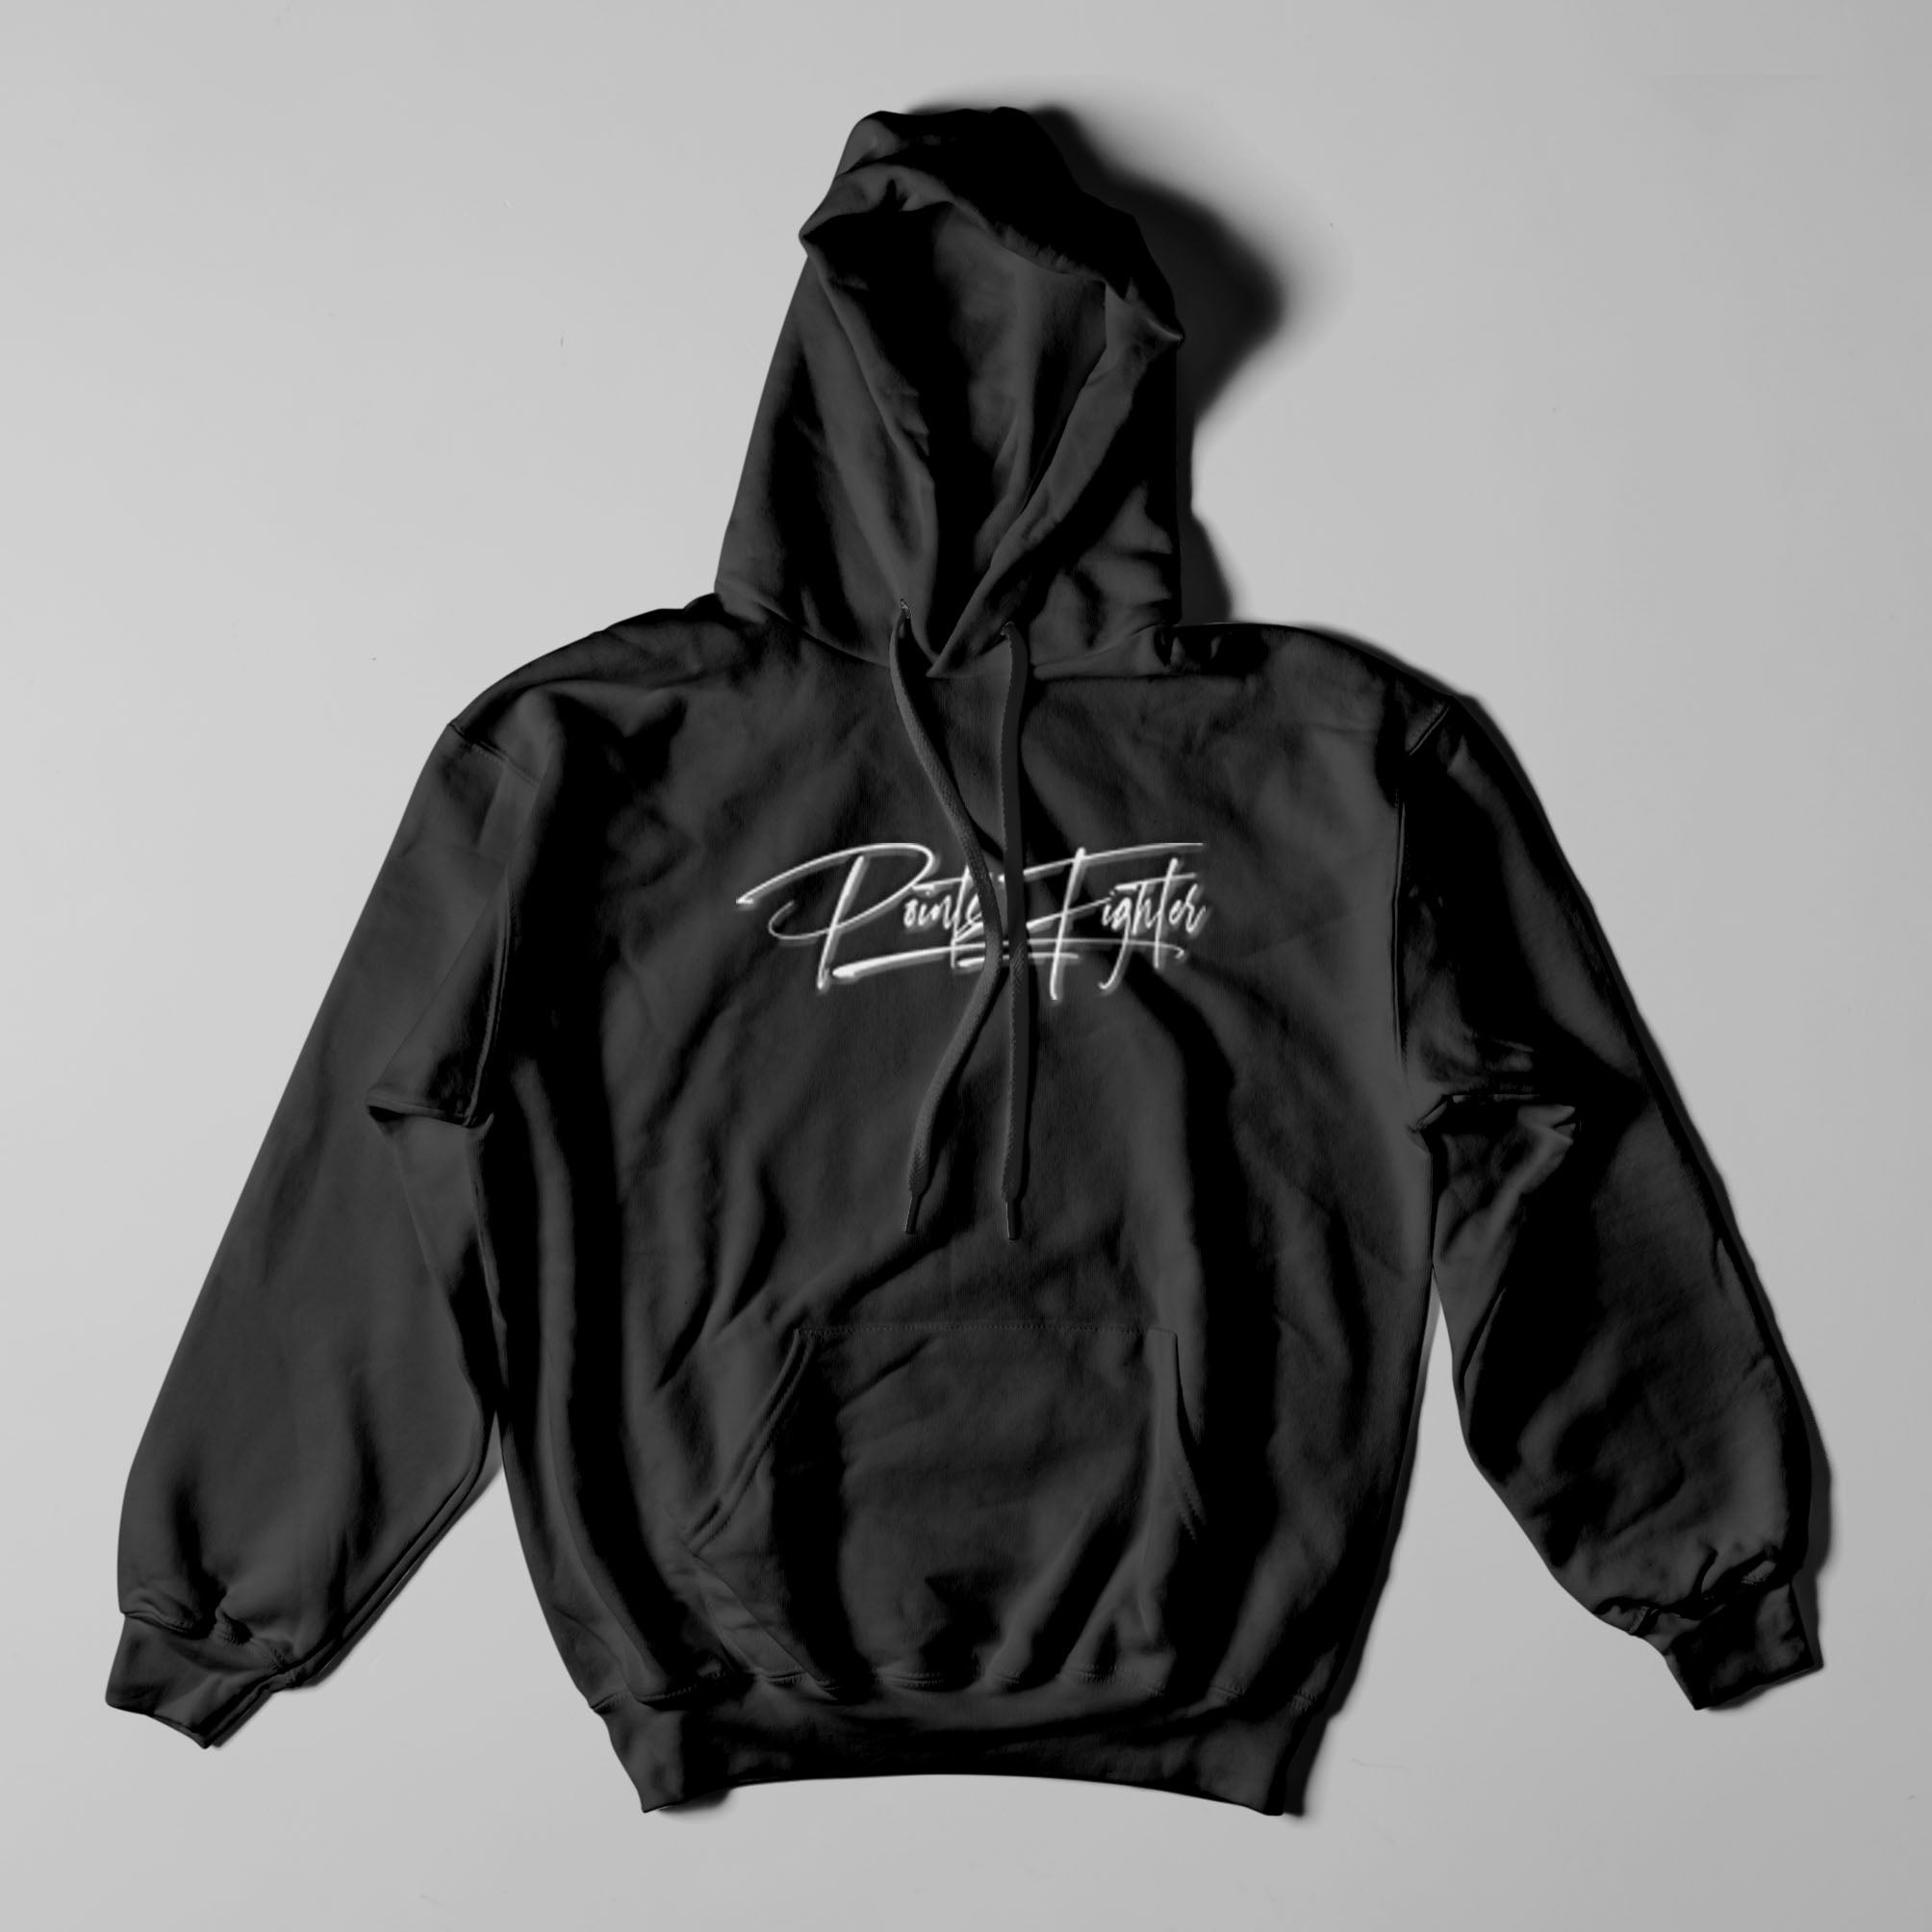 Points Fighter '96 Signature Hood